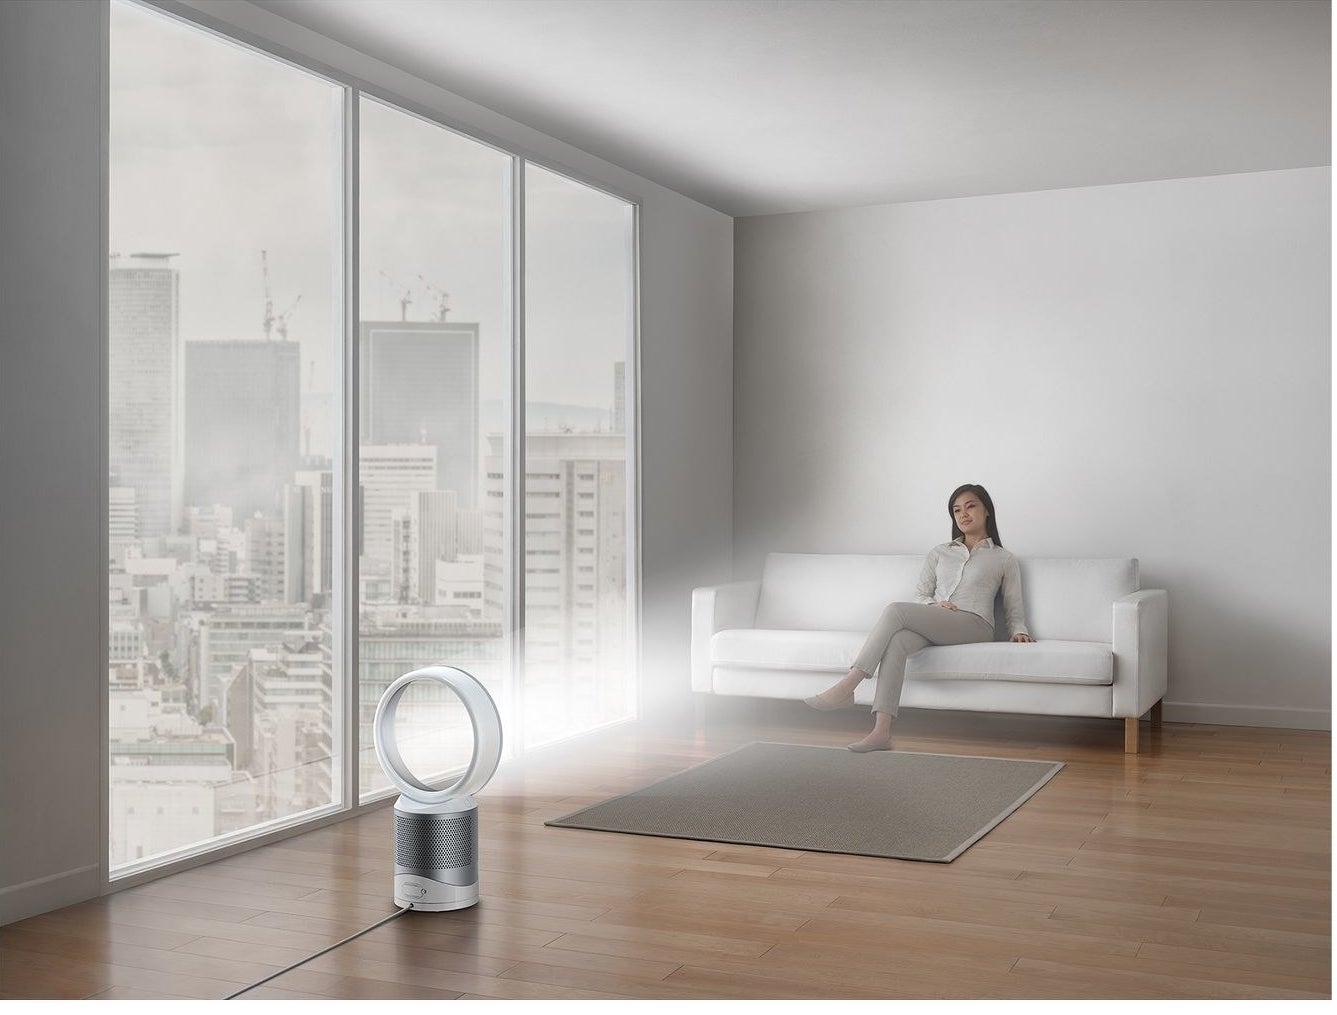 dyson air purifier and fan with circular design in a room with a model